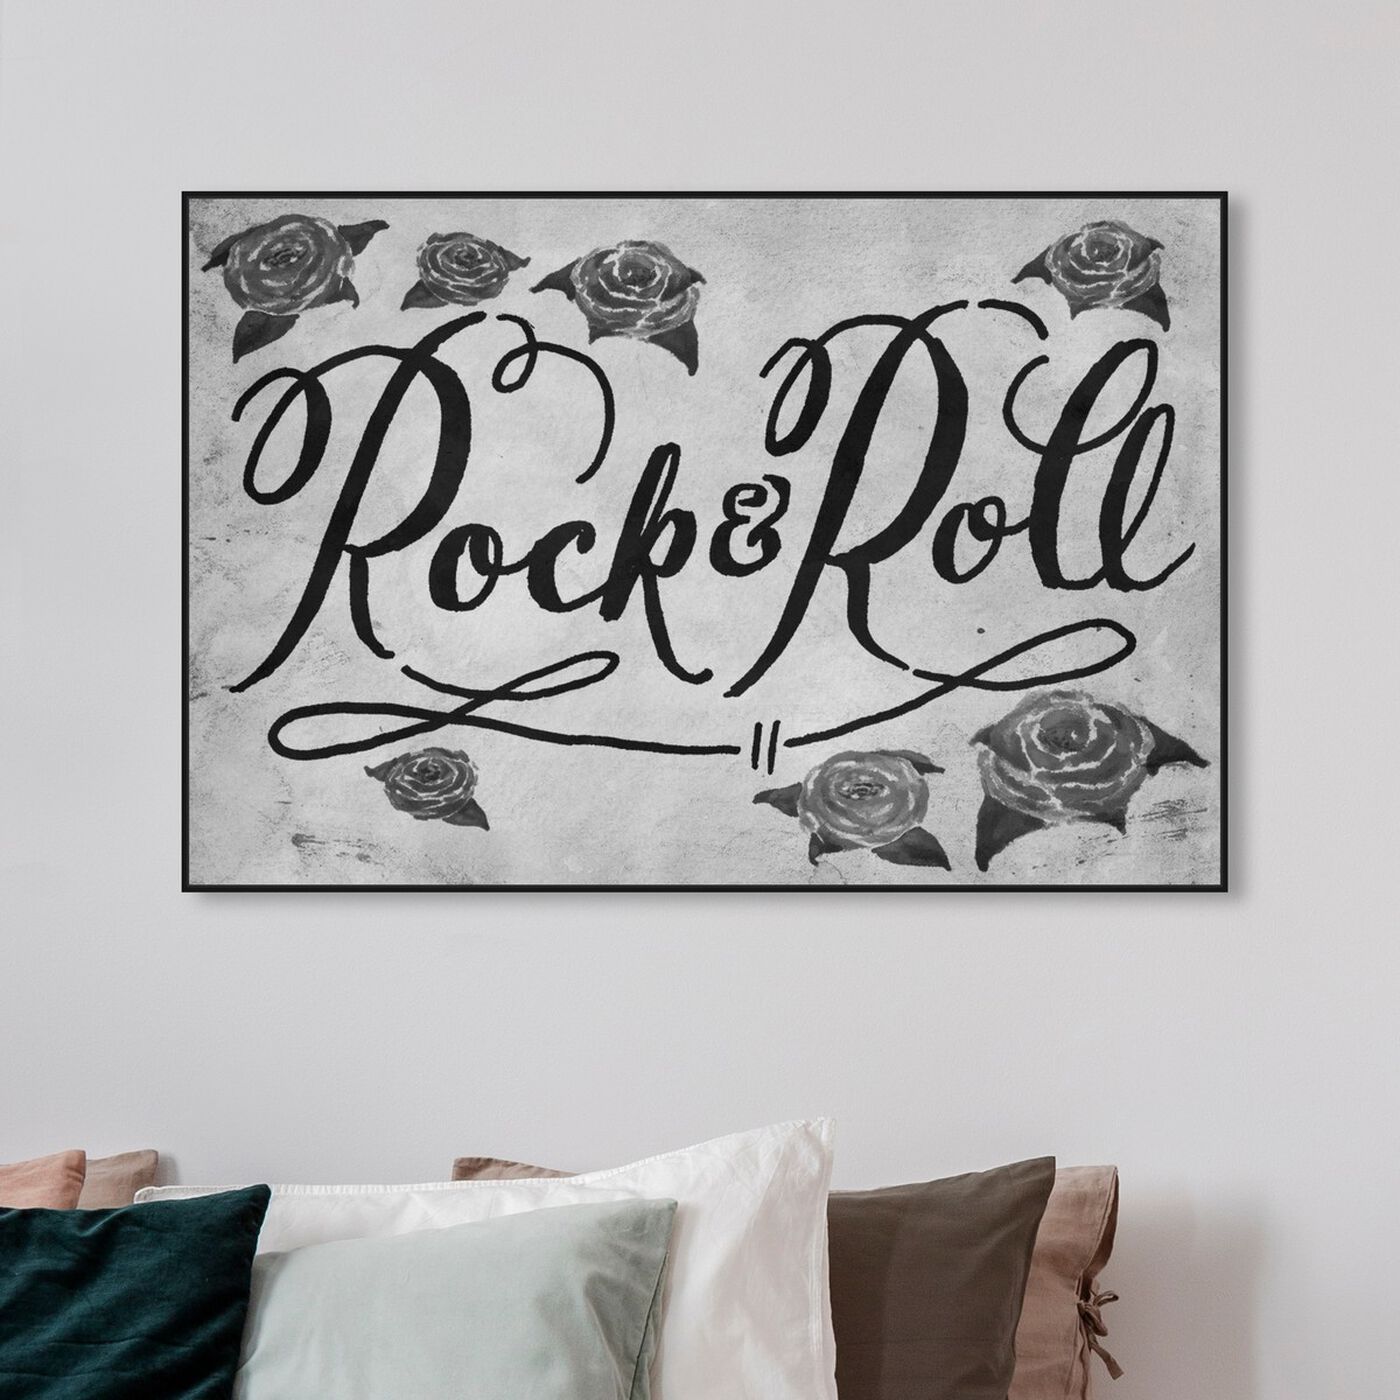 Hanging view of Rock The Rose featuring music and dance and music genres art.